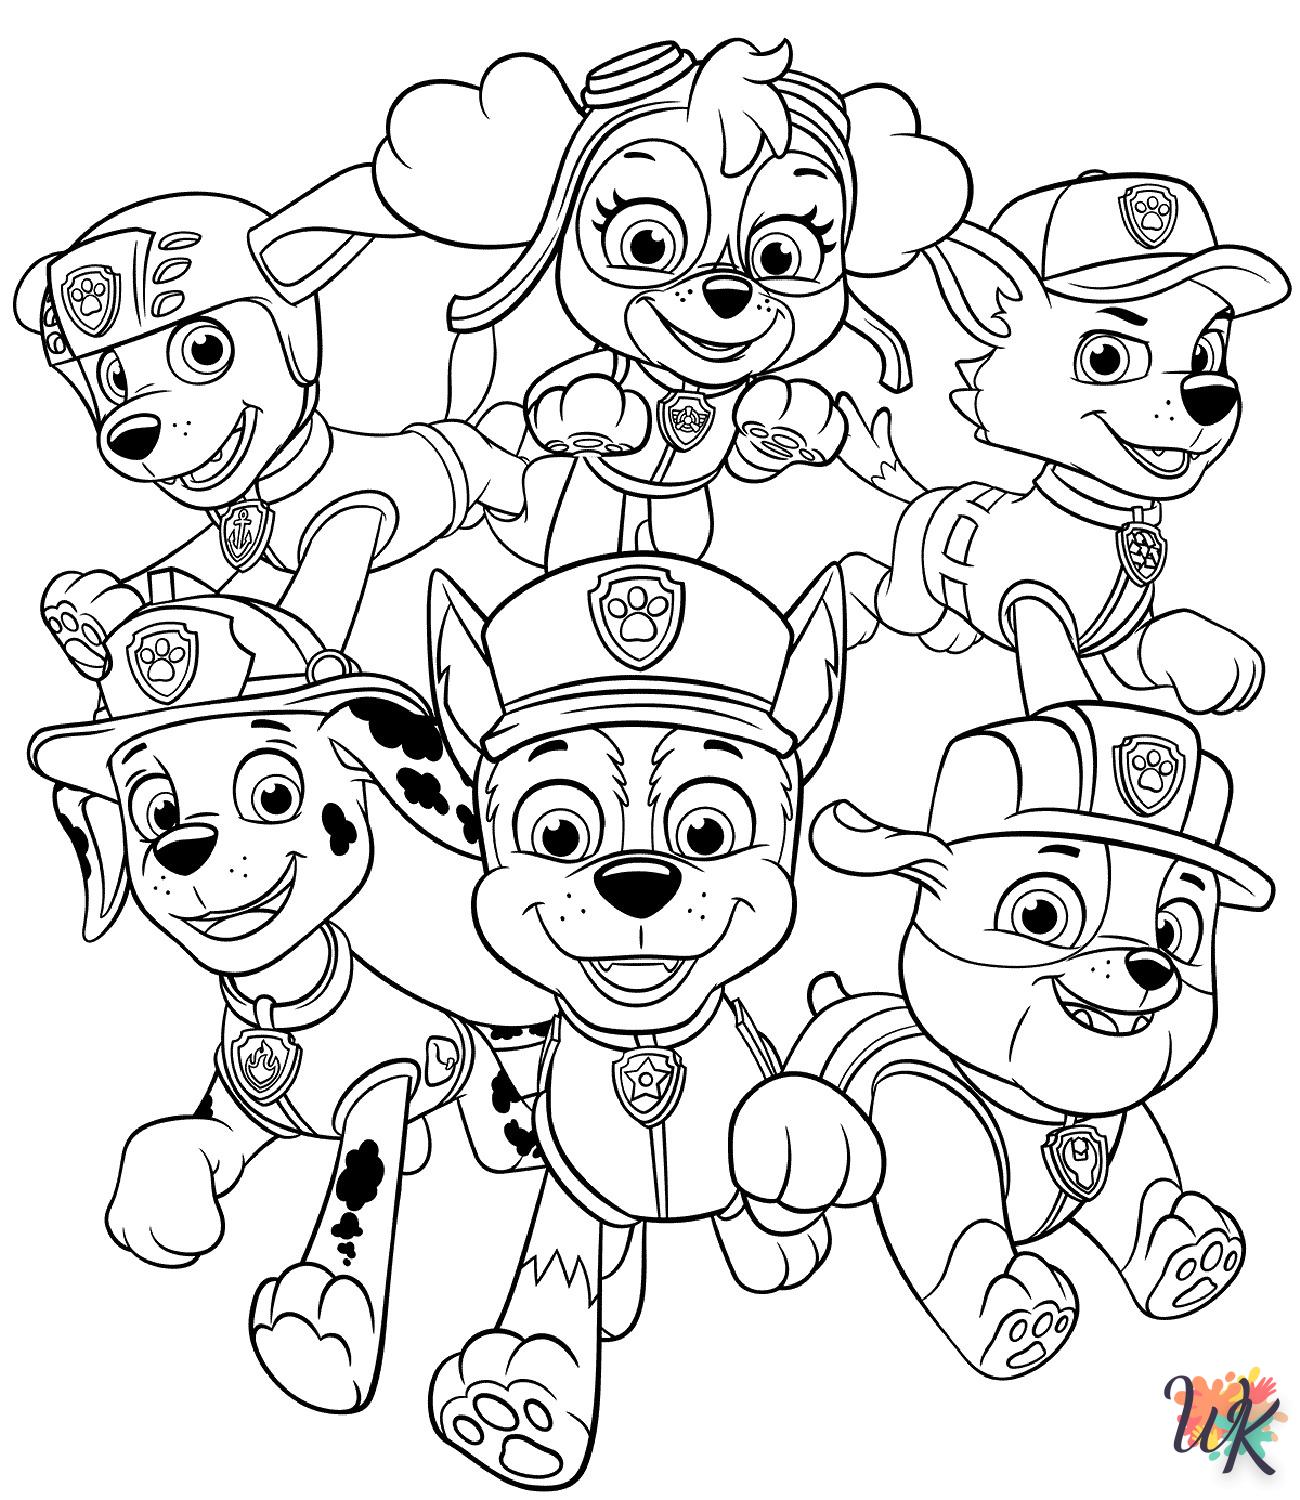 Paw Patrol coloring pages grinch